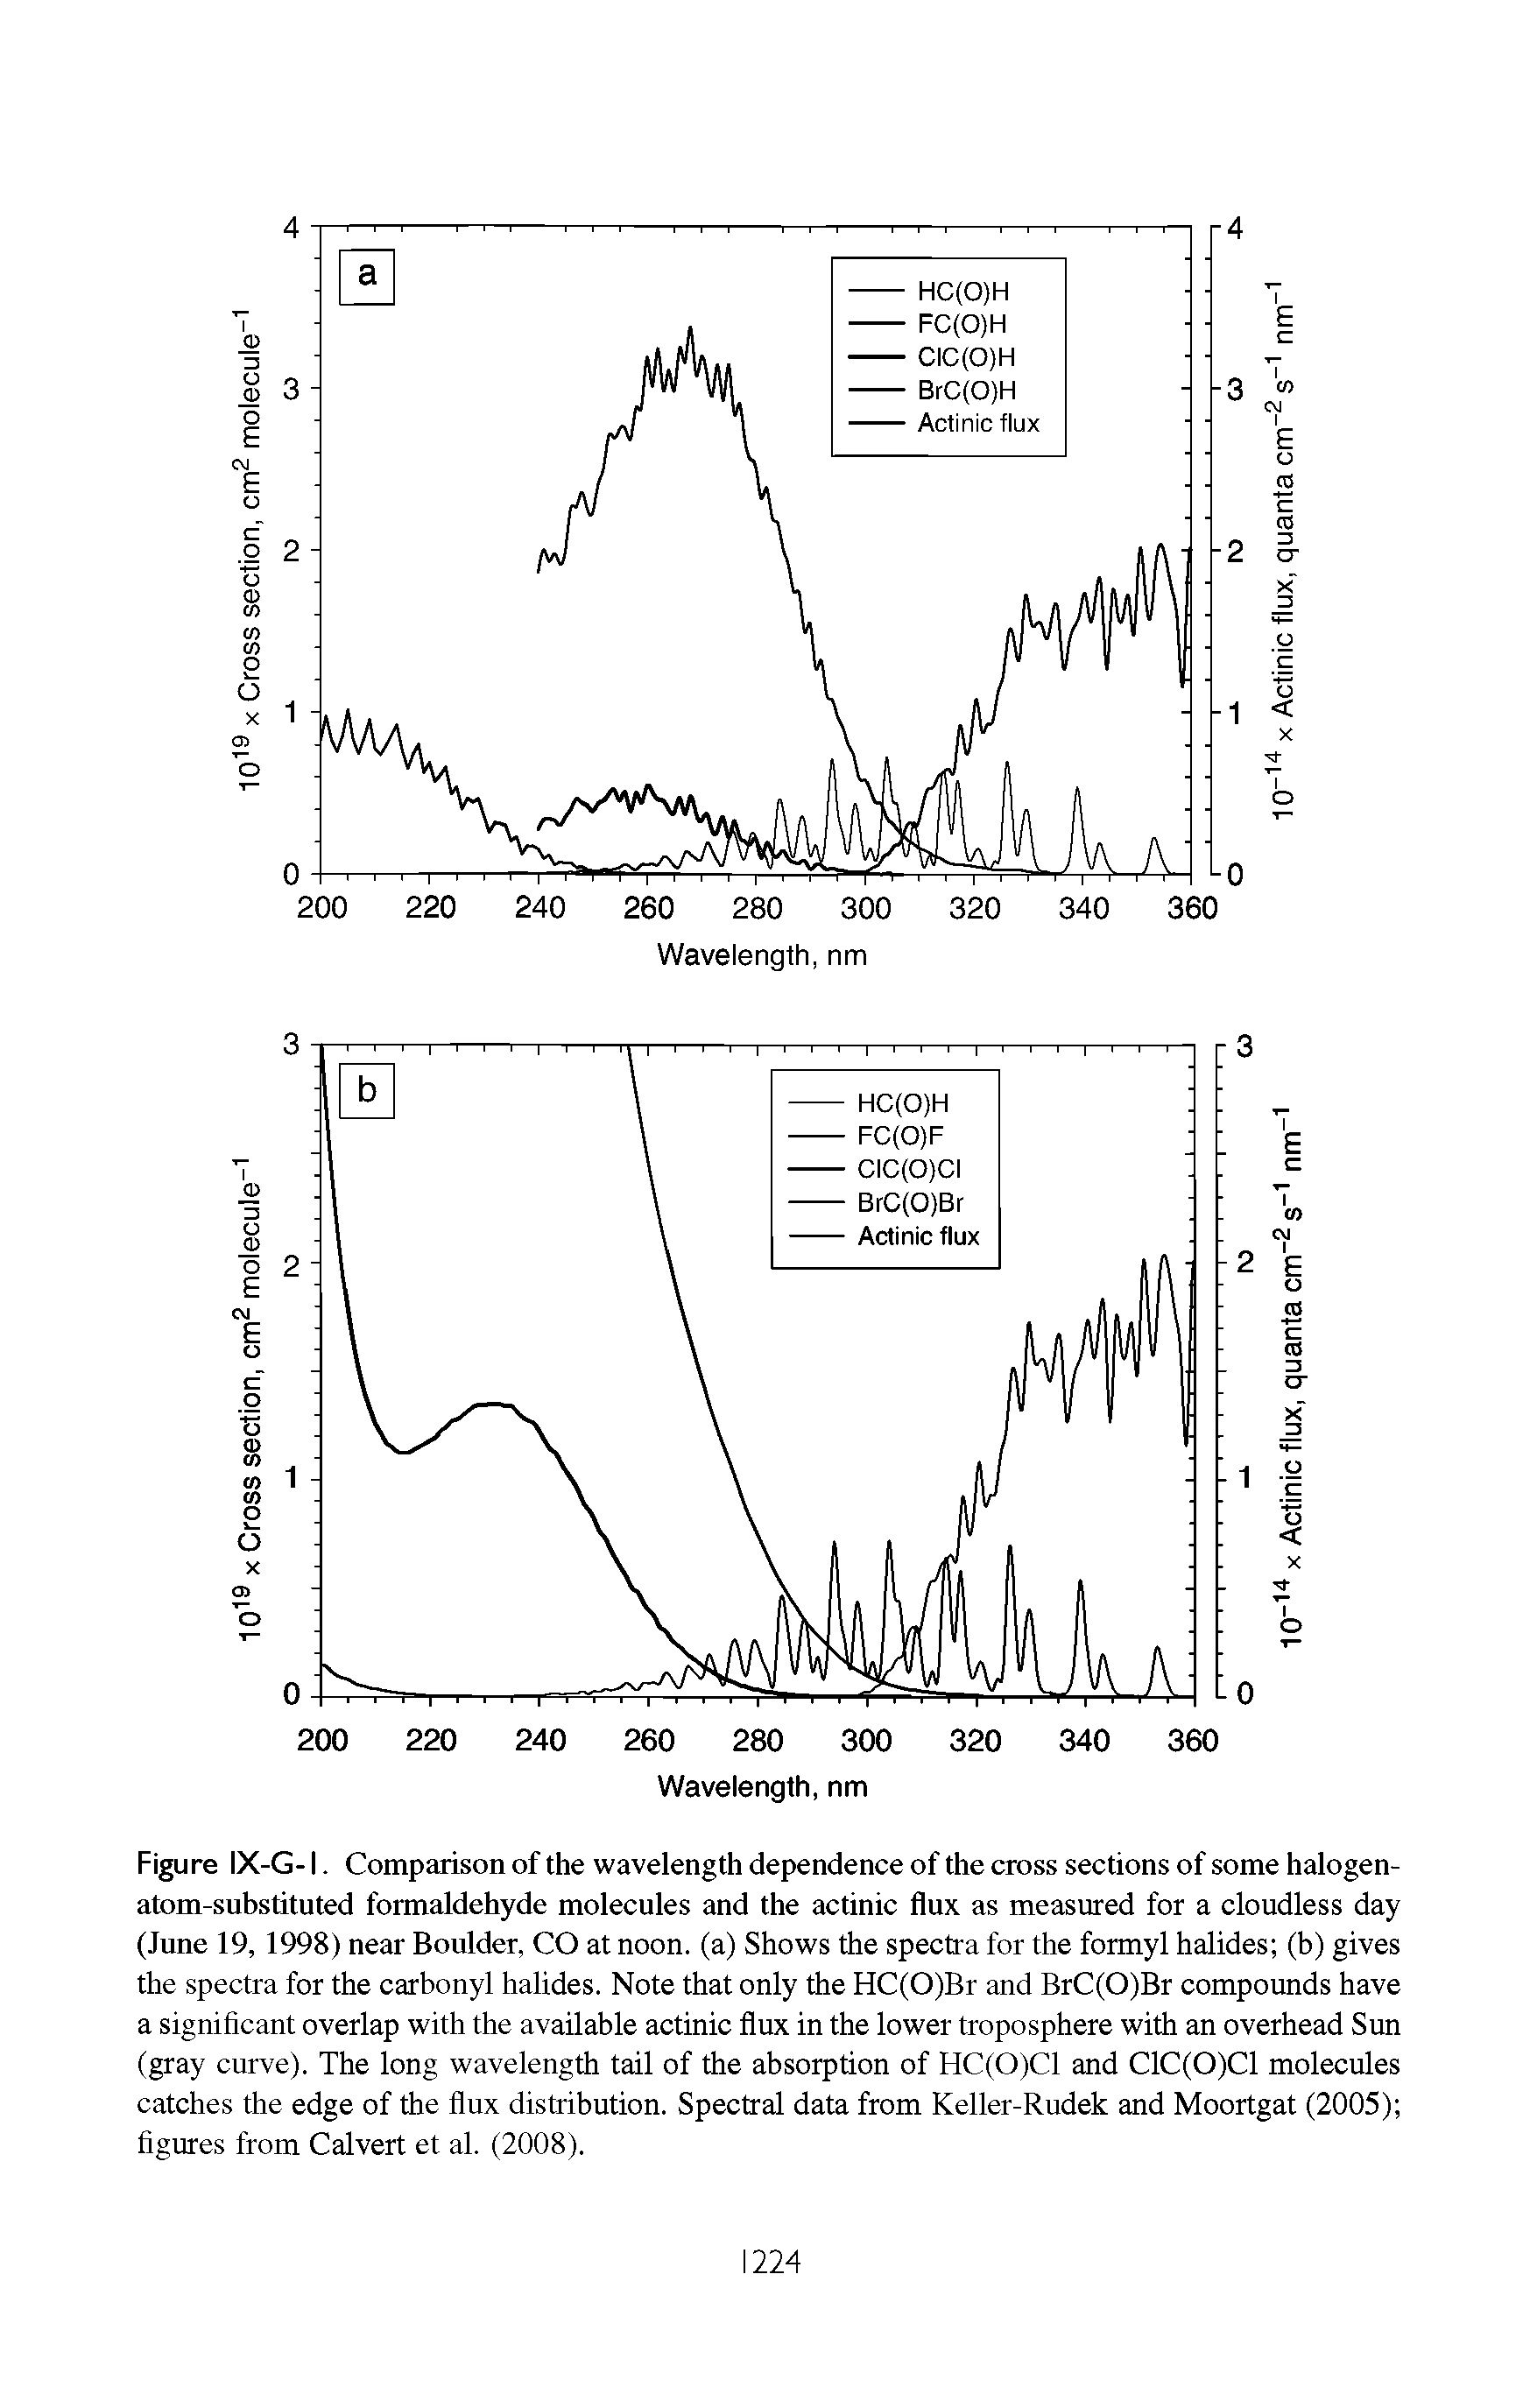 Figure IX-G-1. Comparison of the wavelength dependence of the cross sections of some halogen-atom-substituted formaldehyde molecules and the actinic flux as measured for a cloudless day (June 19, 1998) near Boulder, CO at noon, (a) Shows the spectra for the formyl halides (b) gives the spectra for the carbonyl halides. Note that only the HC(0)Br and BrC(0)Br compounds have a significant overlap with the available actinic flux in the lower troposphere with an overhead Sun (gray curve). The long wavelength tail of the absorption of HC(0)C1 and C1C(0)C1 molecules catches the edge of the flux distribution. Spectral data from Keller-Rudek and Moortgat (2005) figures from Calvert et al. (2008).